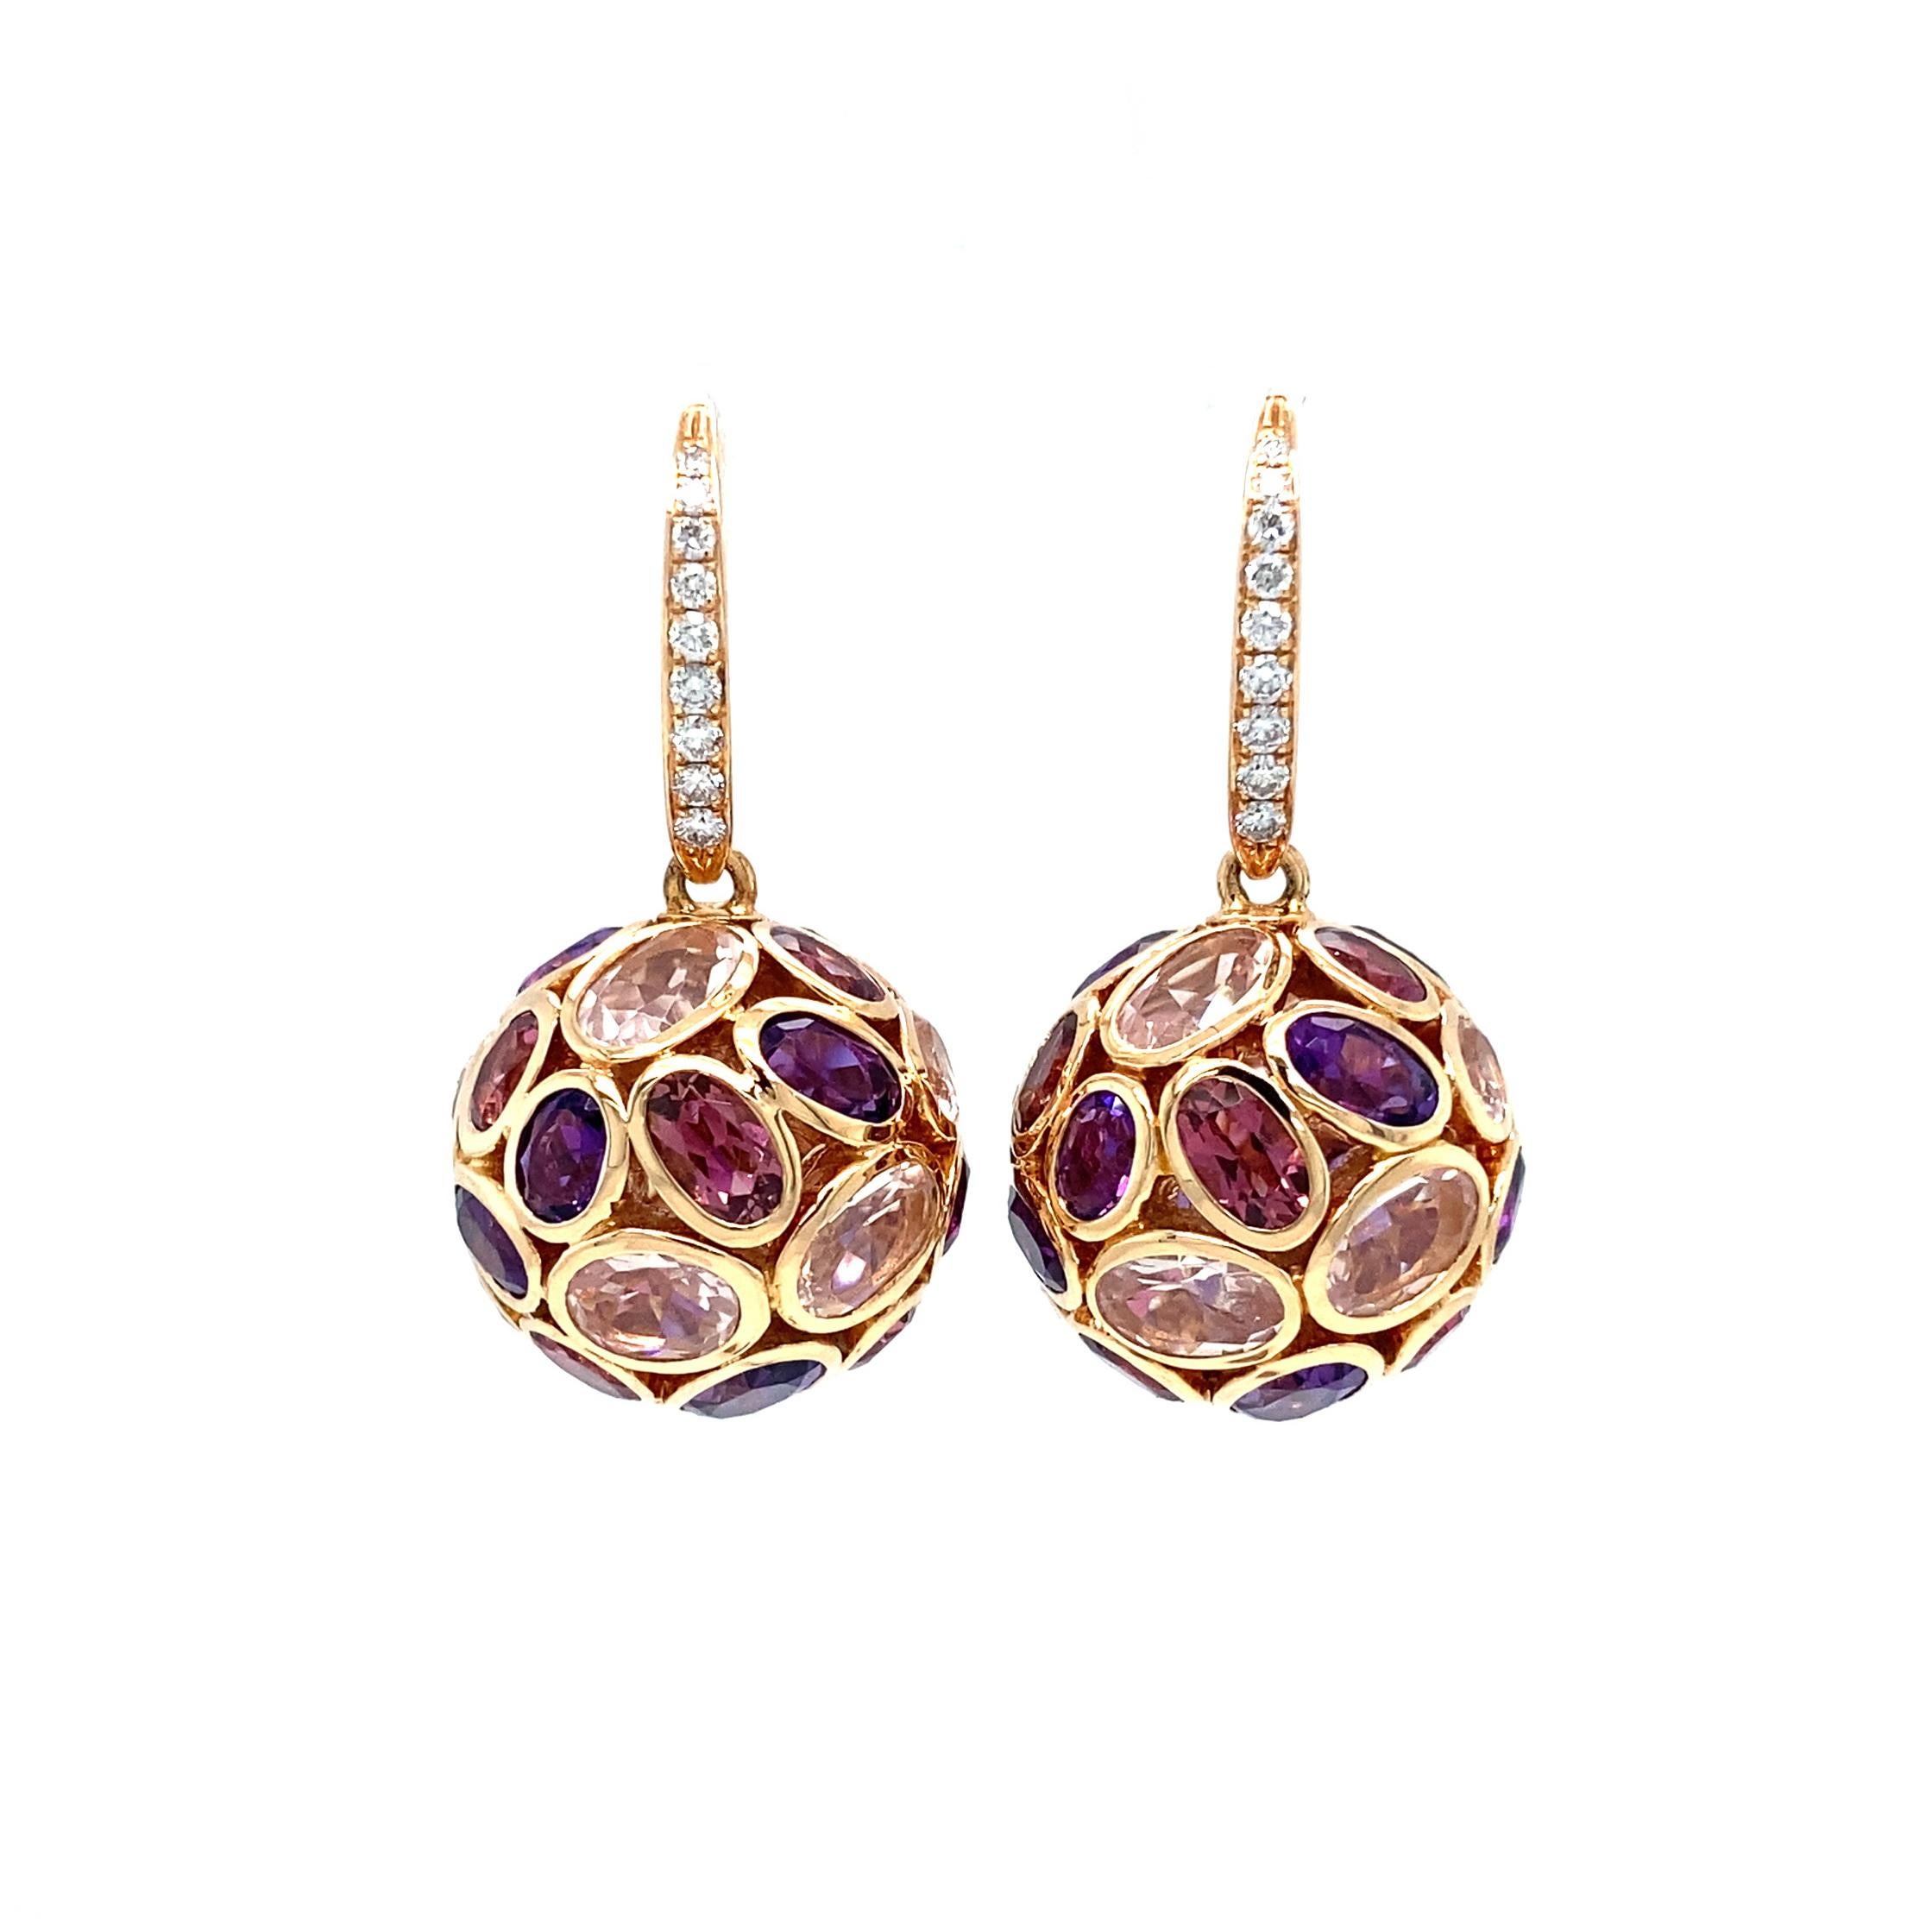 Victor Mayer round dangling sphere earrings 18k rose gold, Casino collection, diamonds, total 0.20ct, G VS, brilliant cut, pink tourmalines, amethysts, rose quartz, measurements app. 30 mm x 15.7 (Ø)

About the creator Victor Mayer
Victor Mayer is